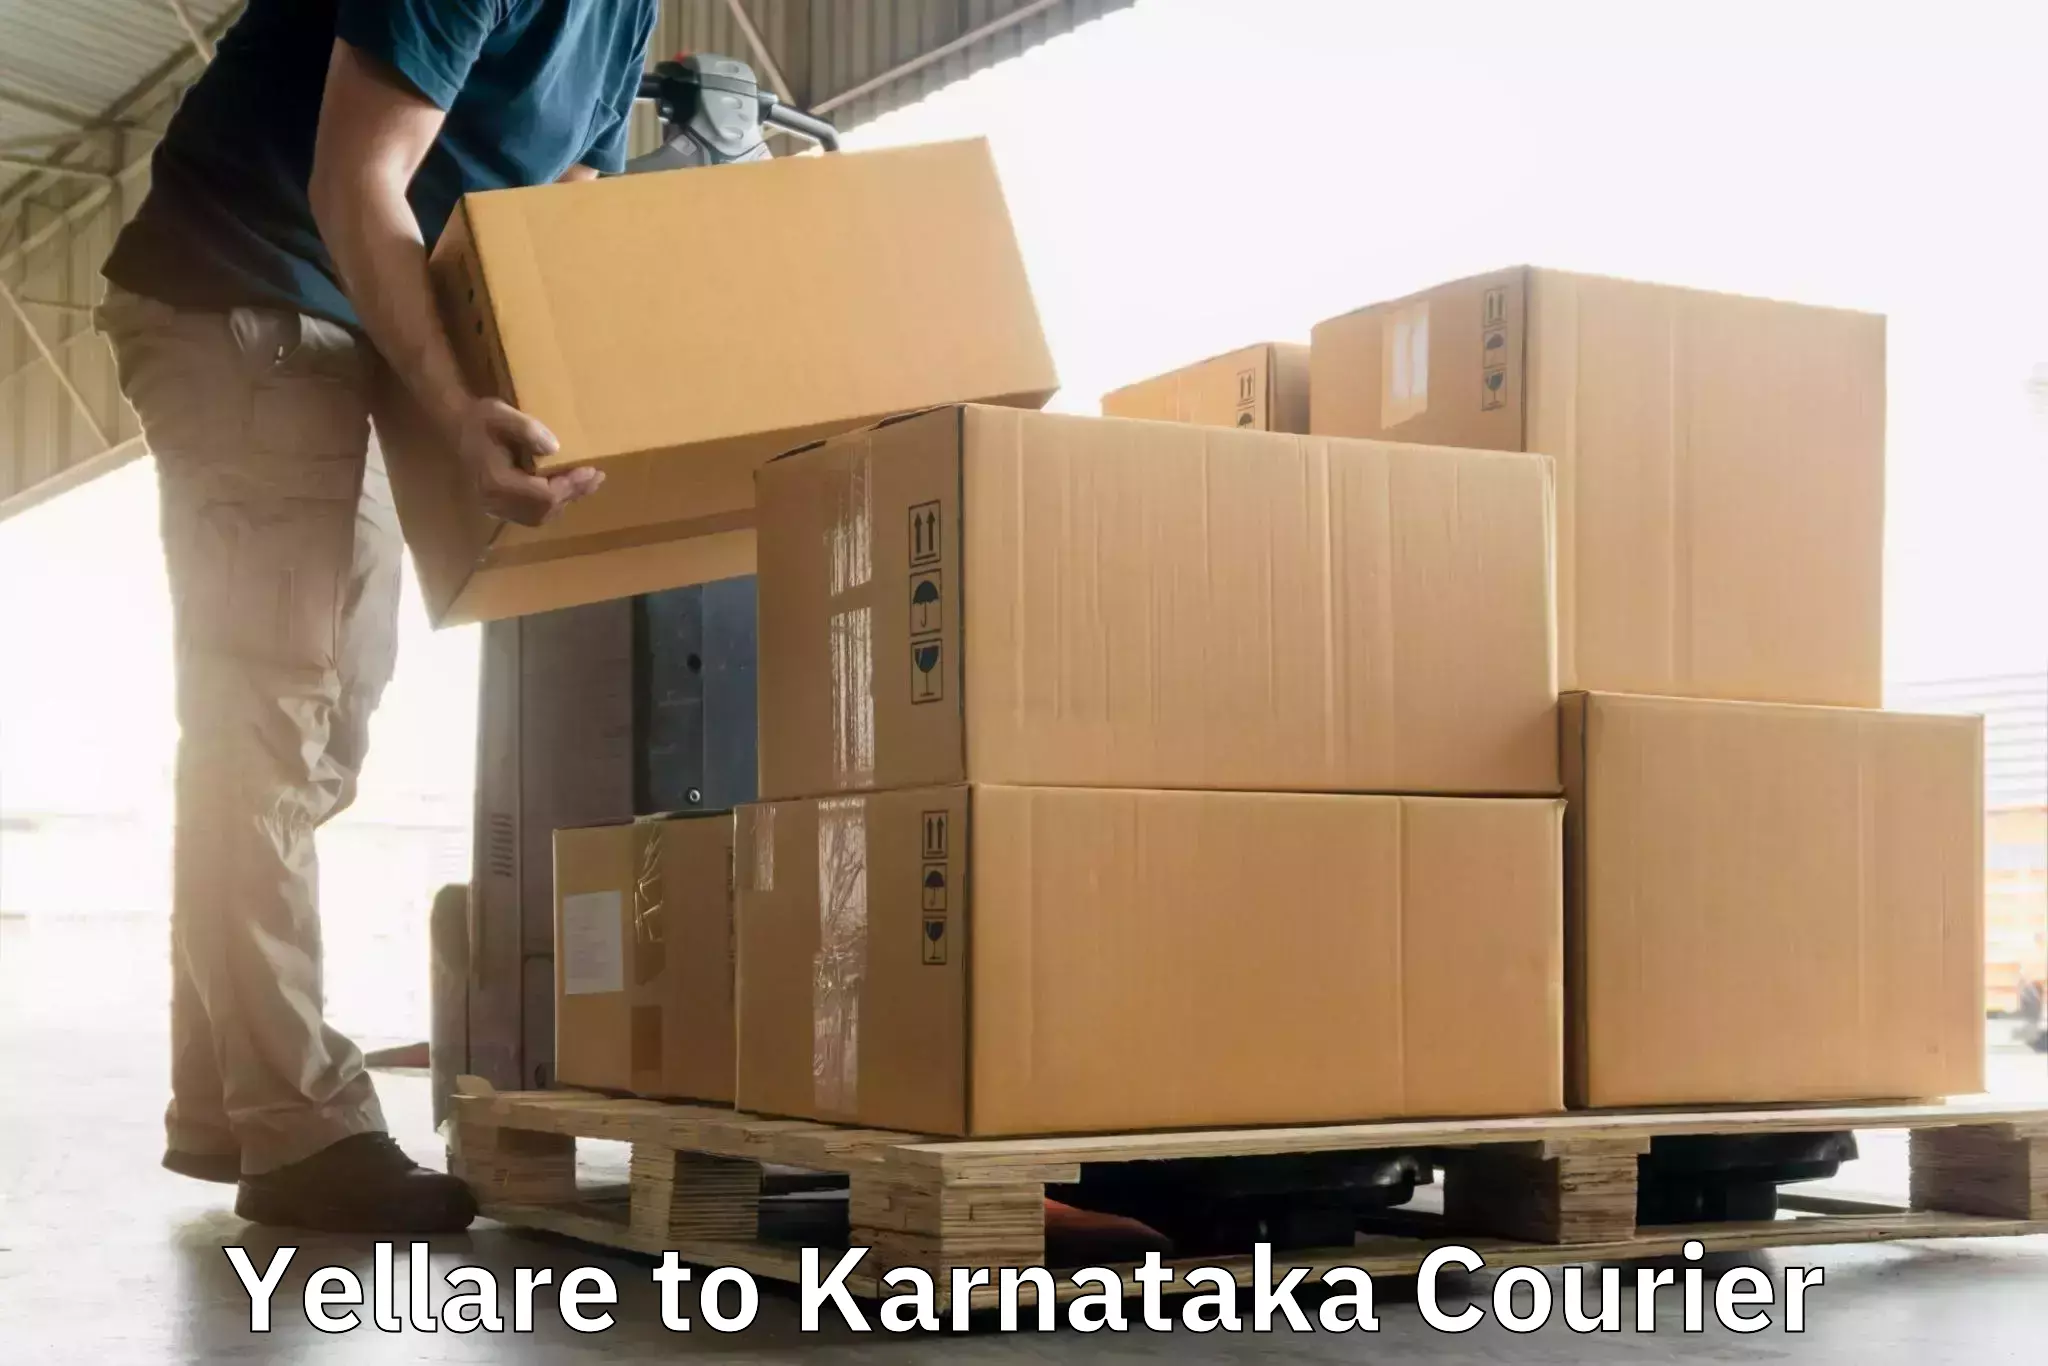 Parcel service for businesses Yellare to Karwar